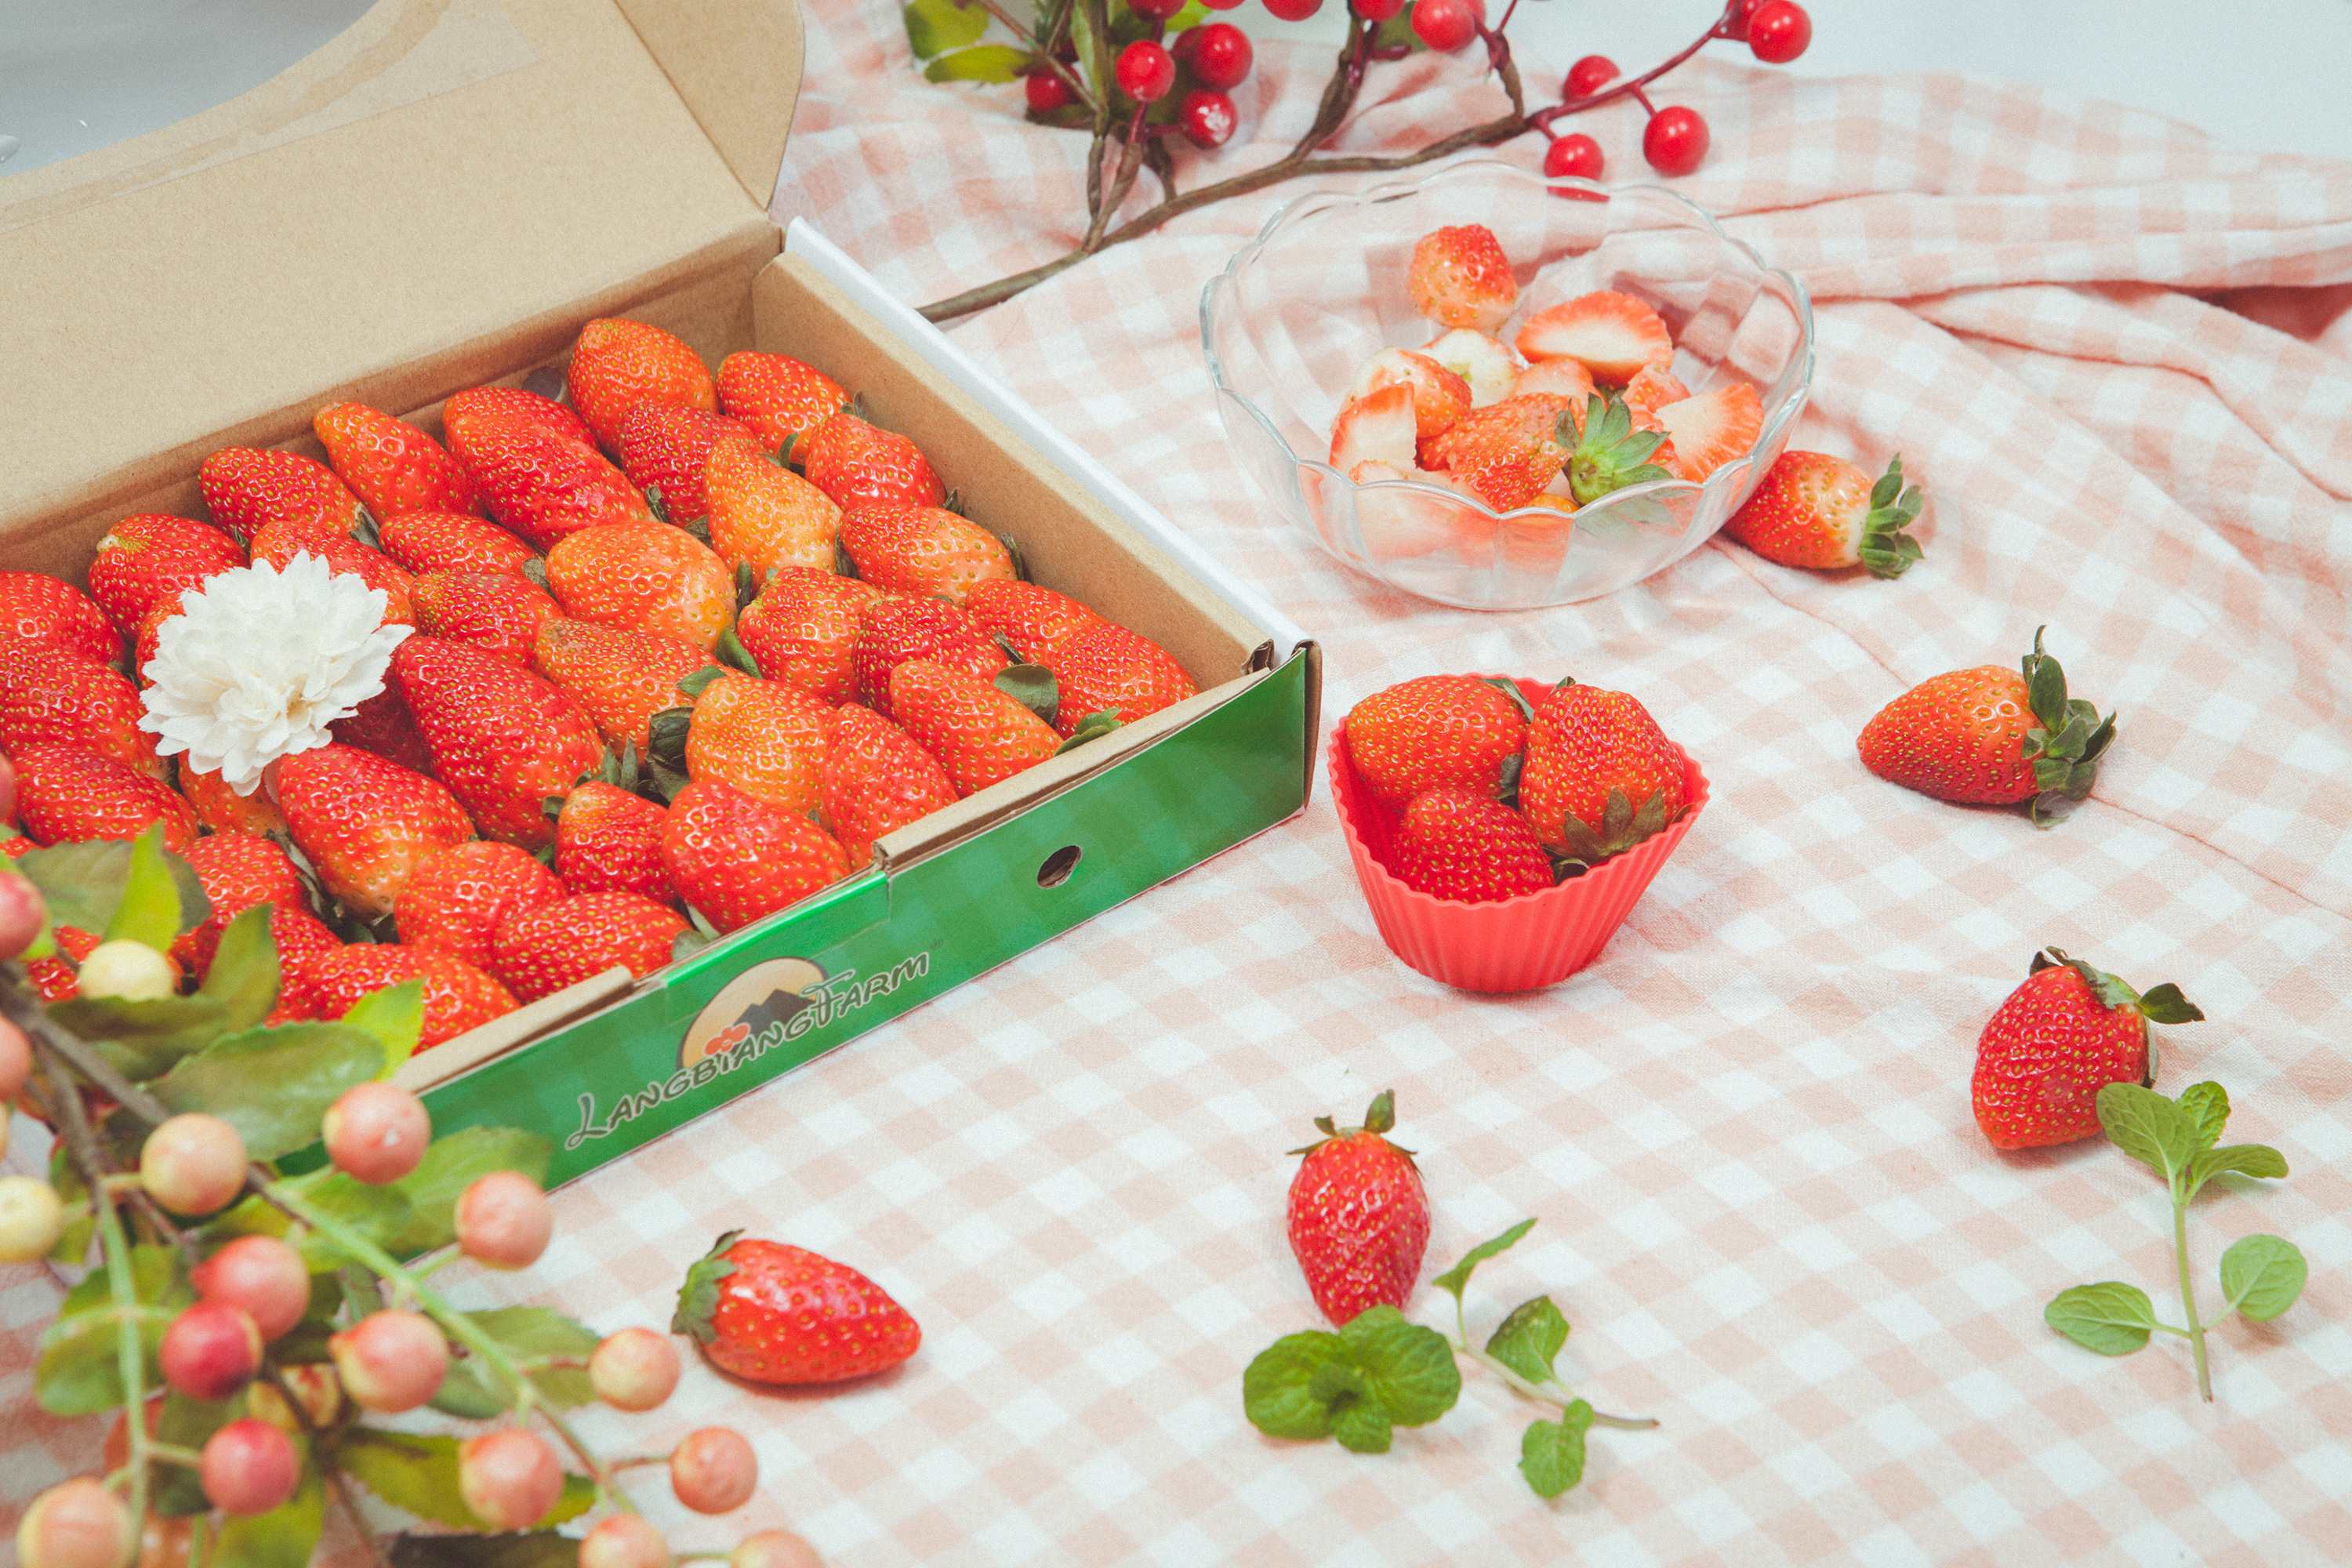 In addition to strawberries grown in Da Lat, Ngoc imports strawberries from Korea and cherries from the USA and Canada. 